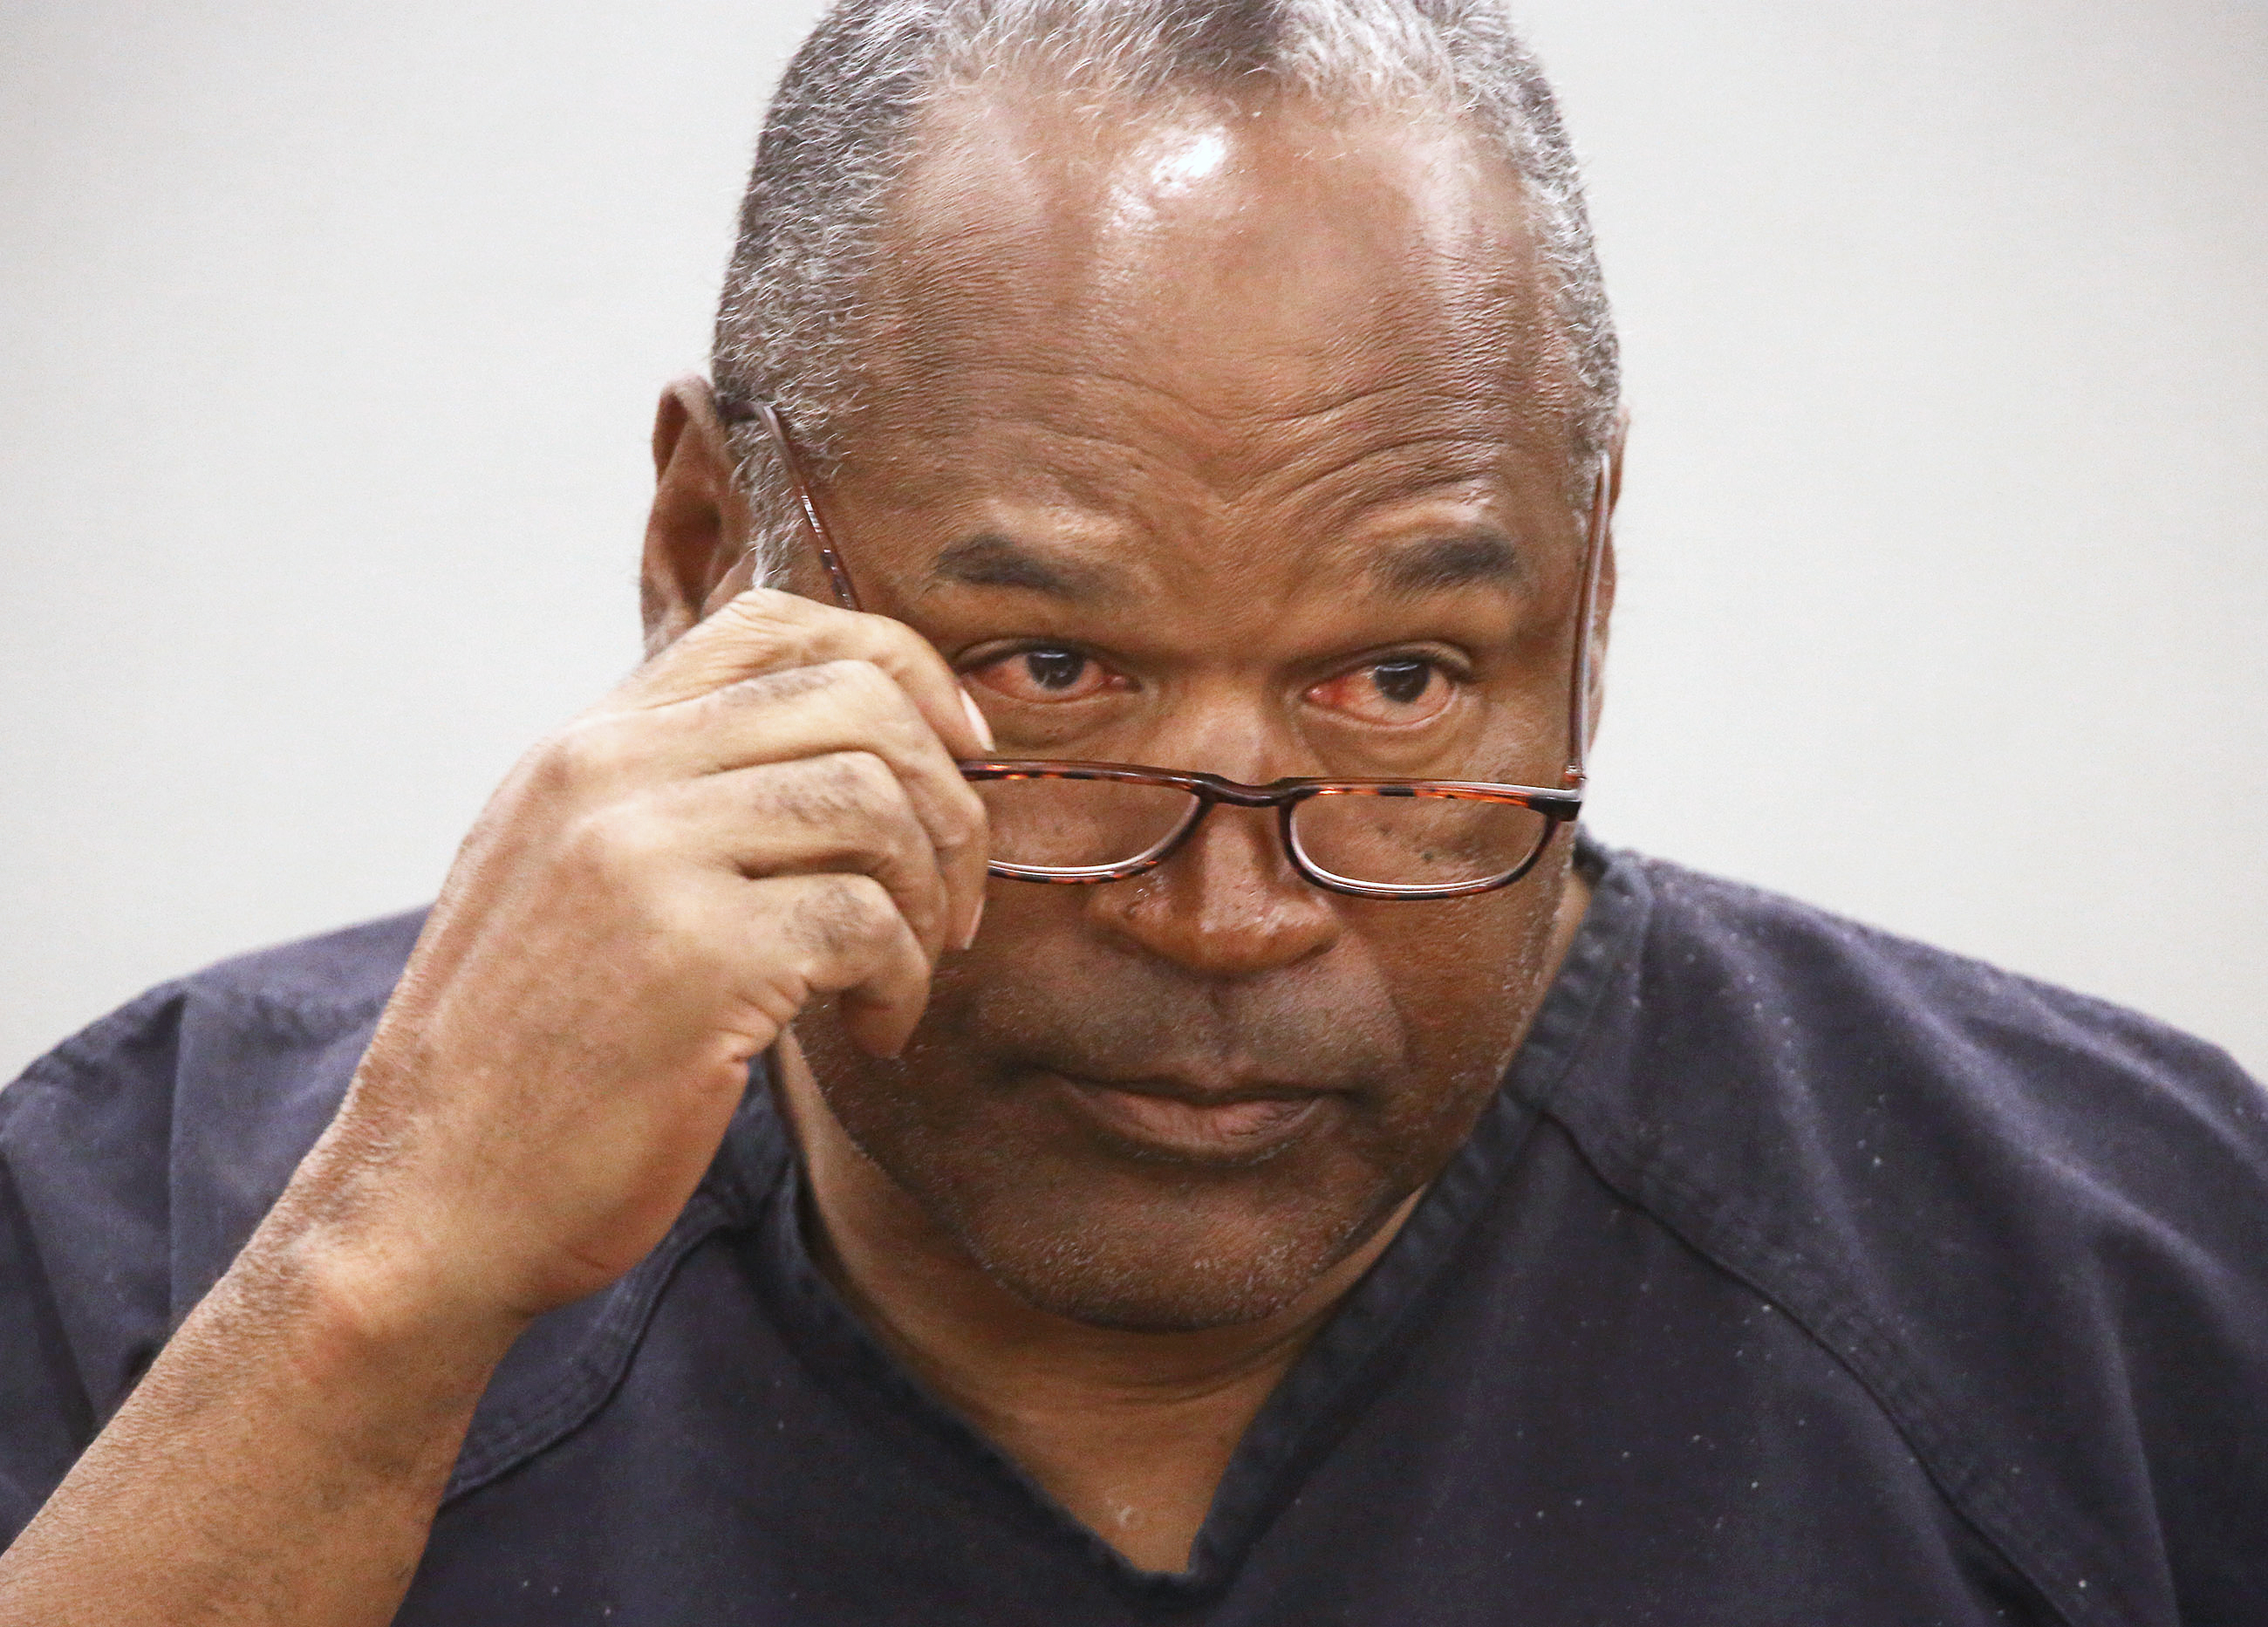 O.J. Simpson takes his glasses off during his evidentiary hearing testimony in Clark County District Court in Las Vegas